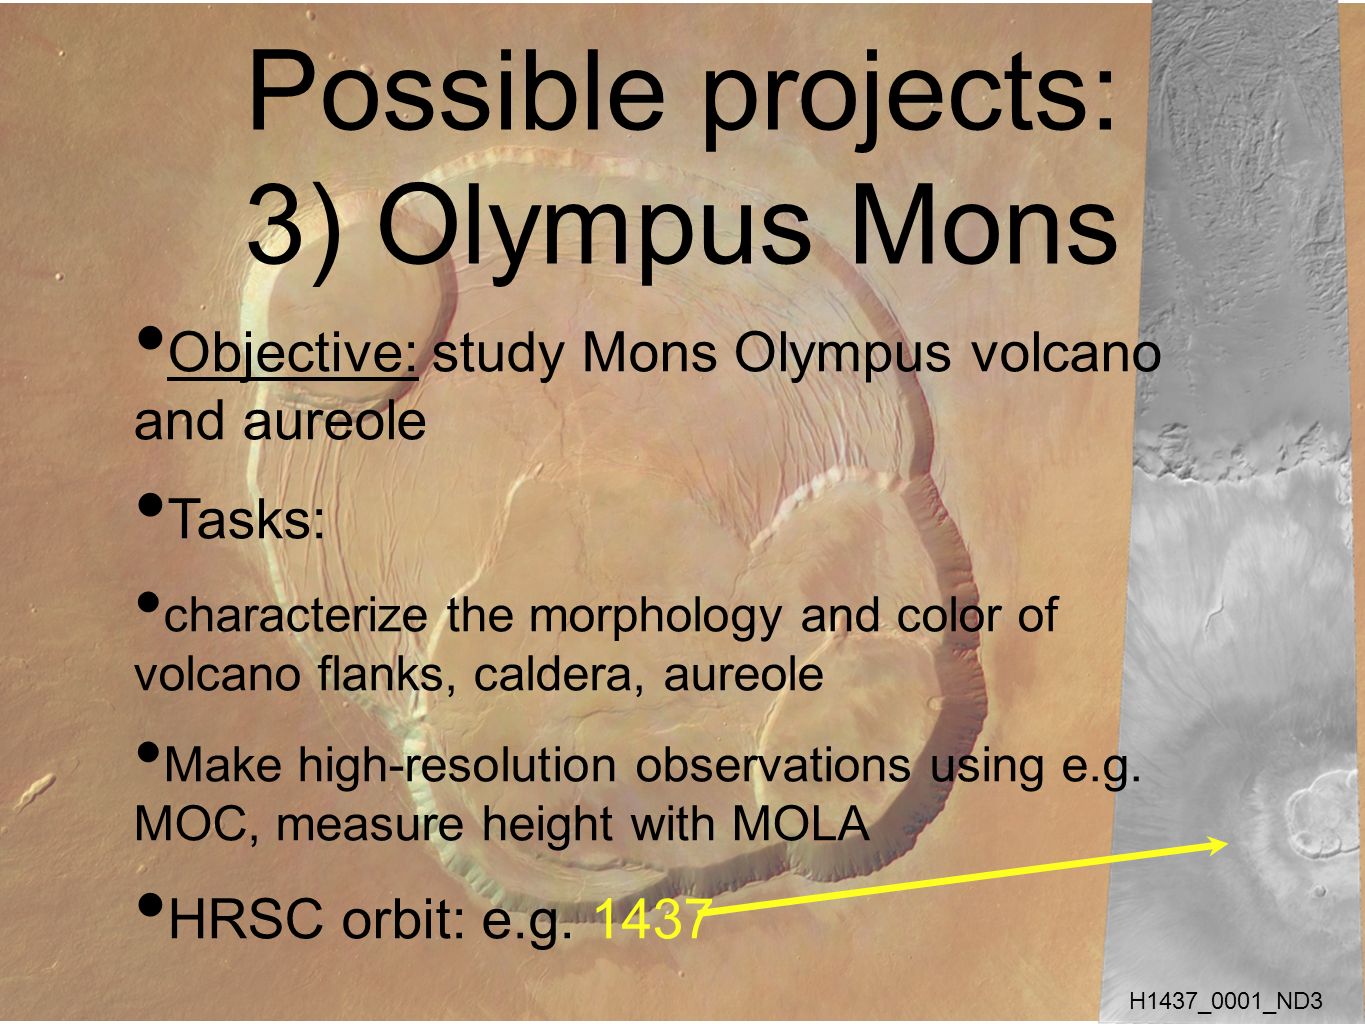 Possible projects: 3) Olympus Mons Objective: study Mons Olympus volcano and aureole Tasks: characterize the morphology and color of volcano flanks, caldera, aureole Make high-resolution observations using e.g.